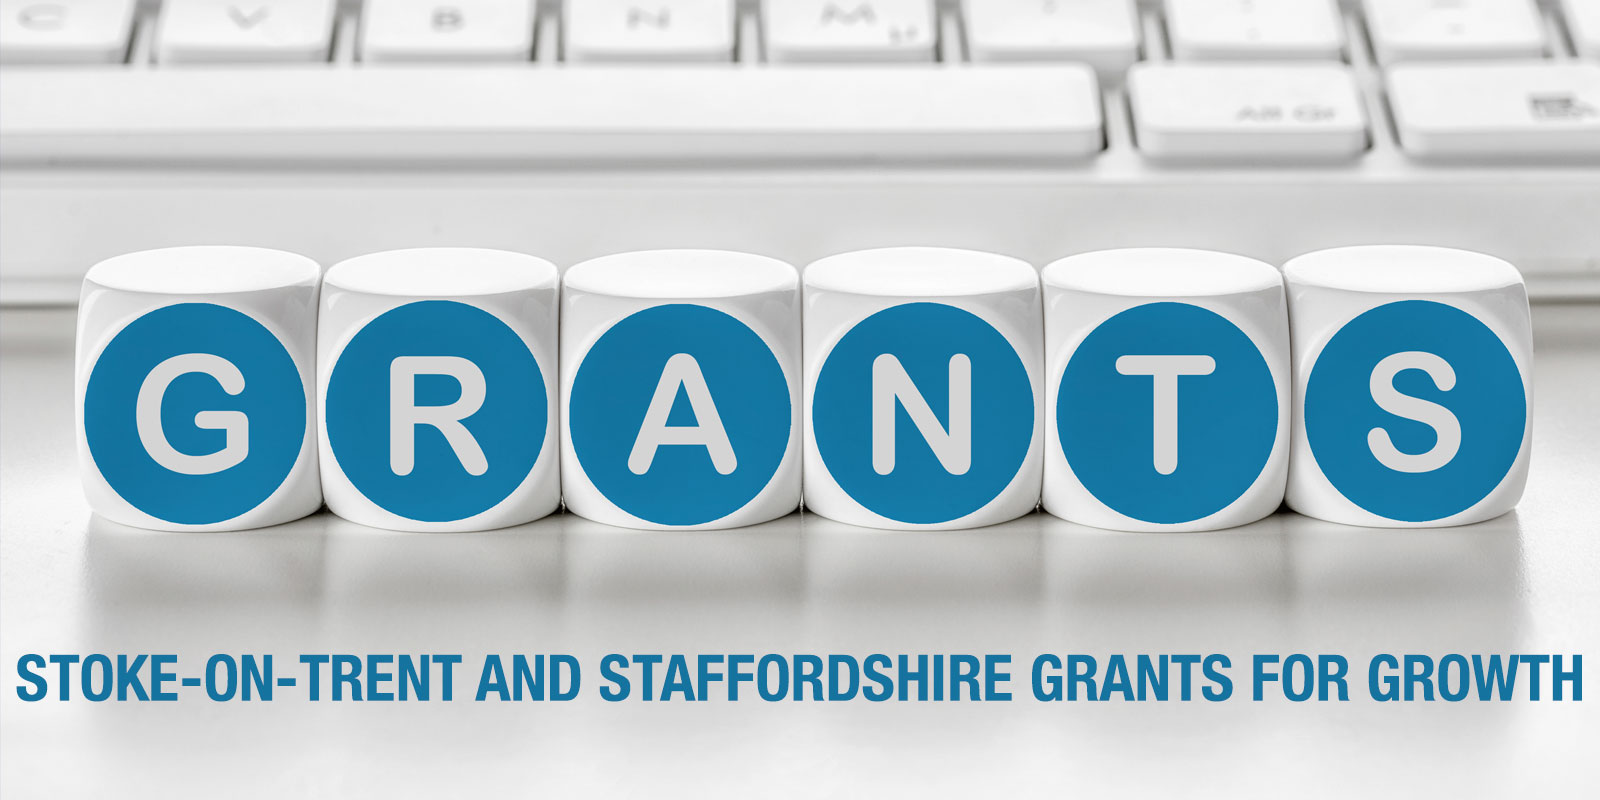 Stoke-on-Trent and Staffordshire Grants for Growth